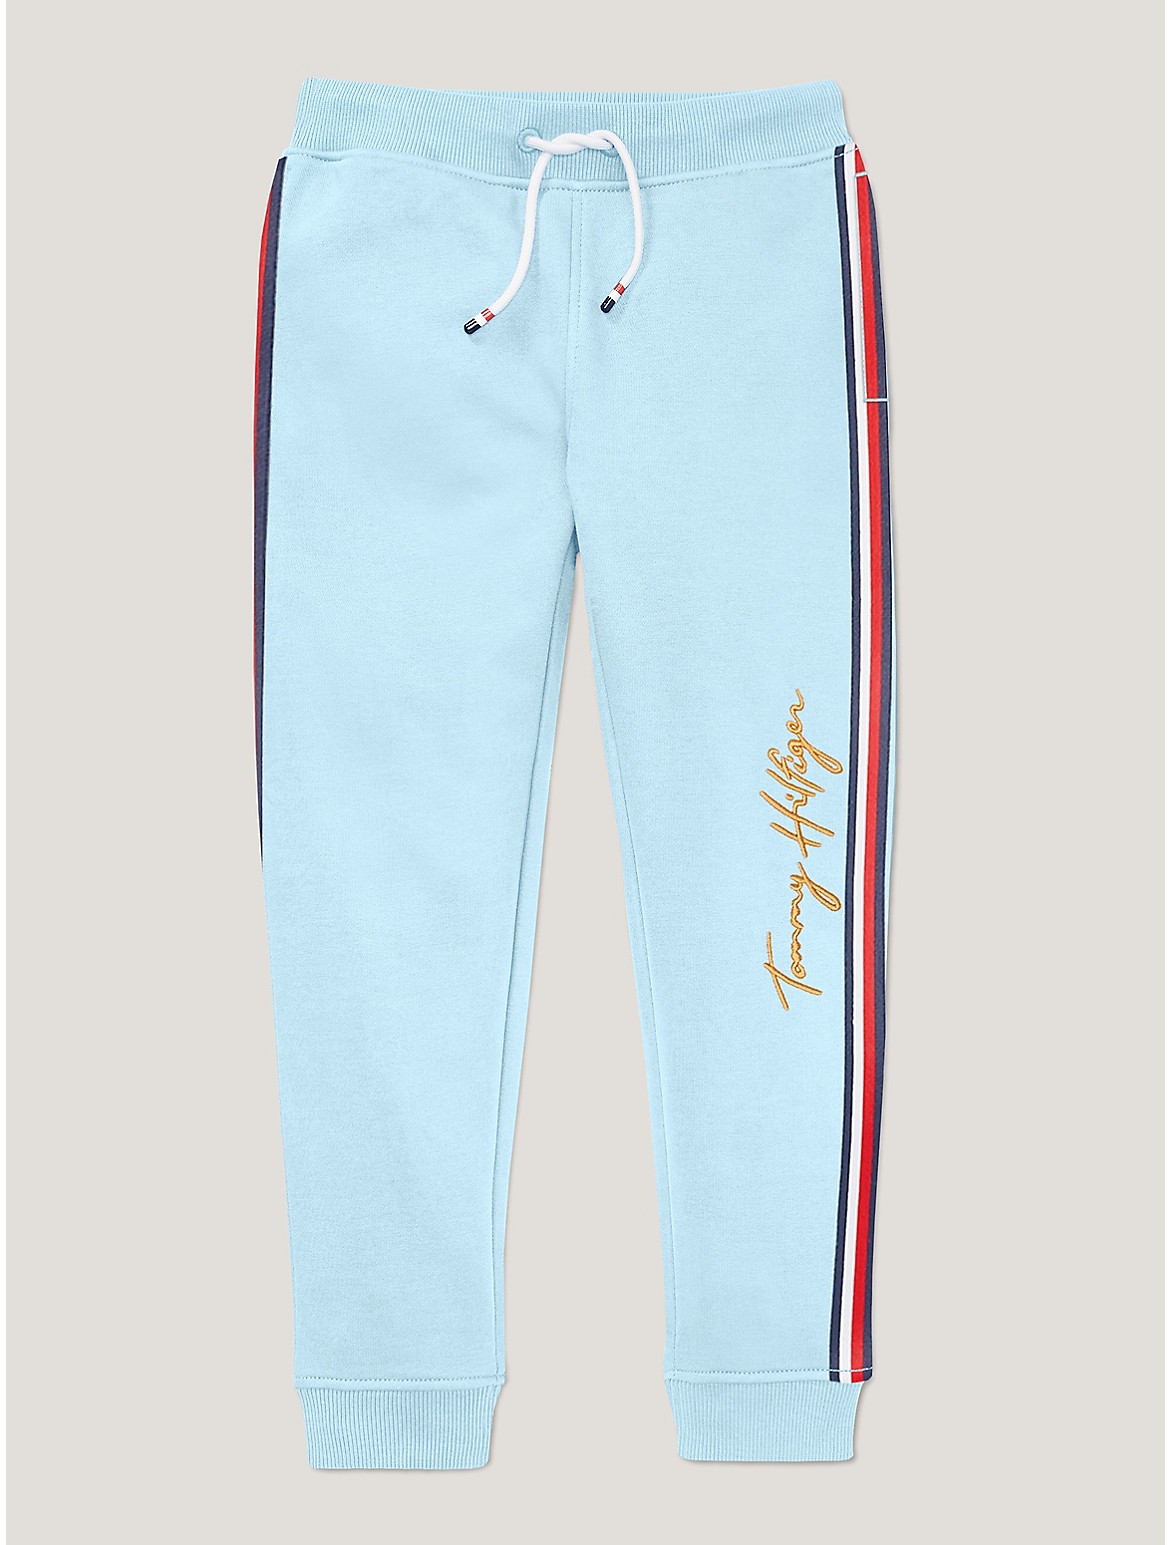 Tommy Hilfiger Boys' Kids' Embroidered Signature Jogger - Blue - XXS